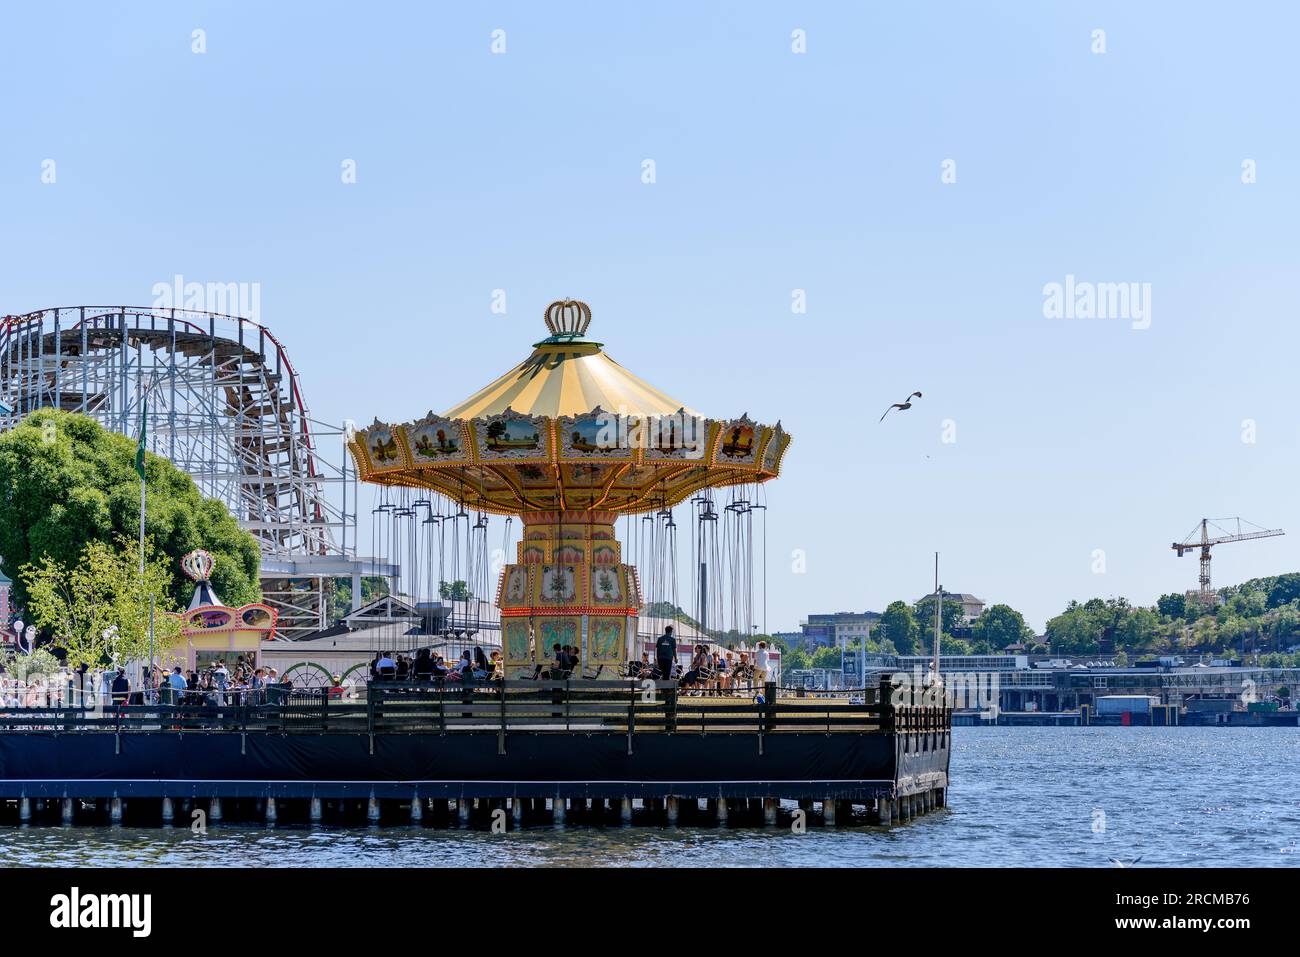 Sweden, Stockholm county, - june 12, 2023: Grona lund amusement park at Djurgarden in summer from the water Stock Photo